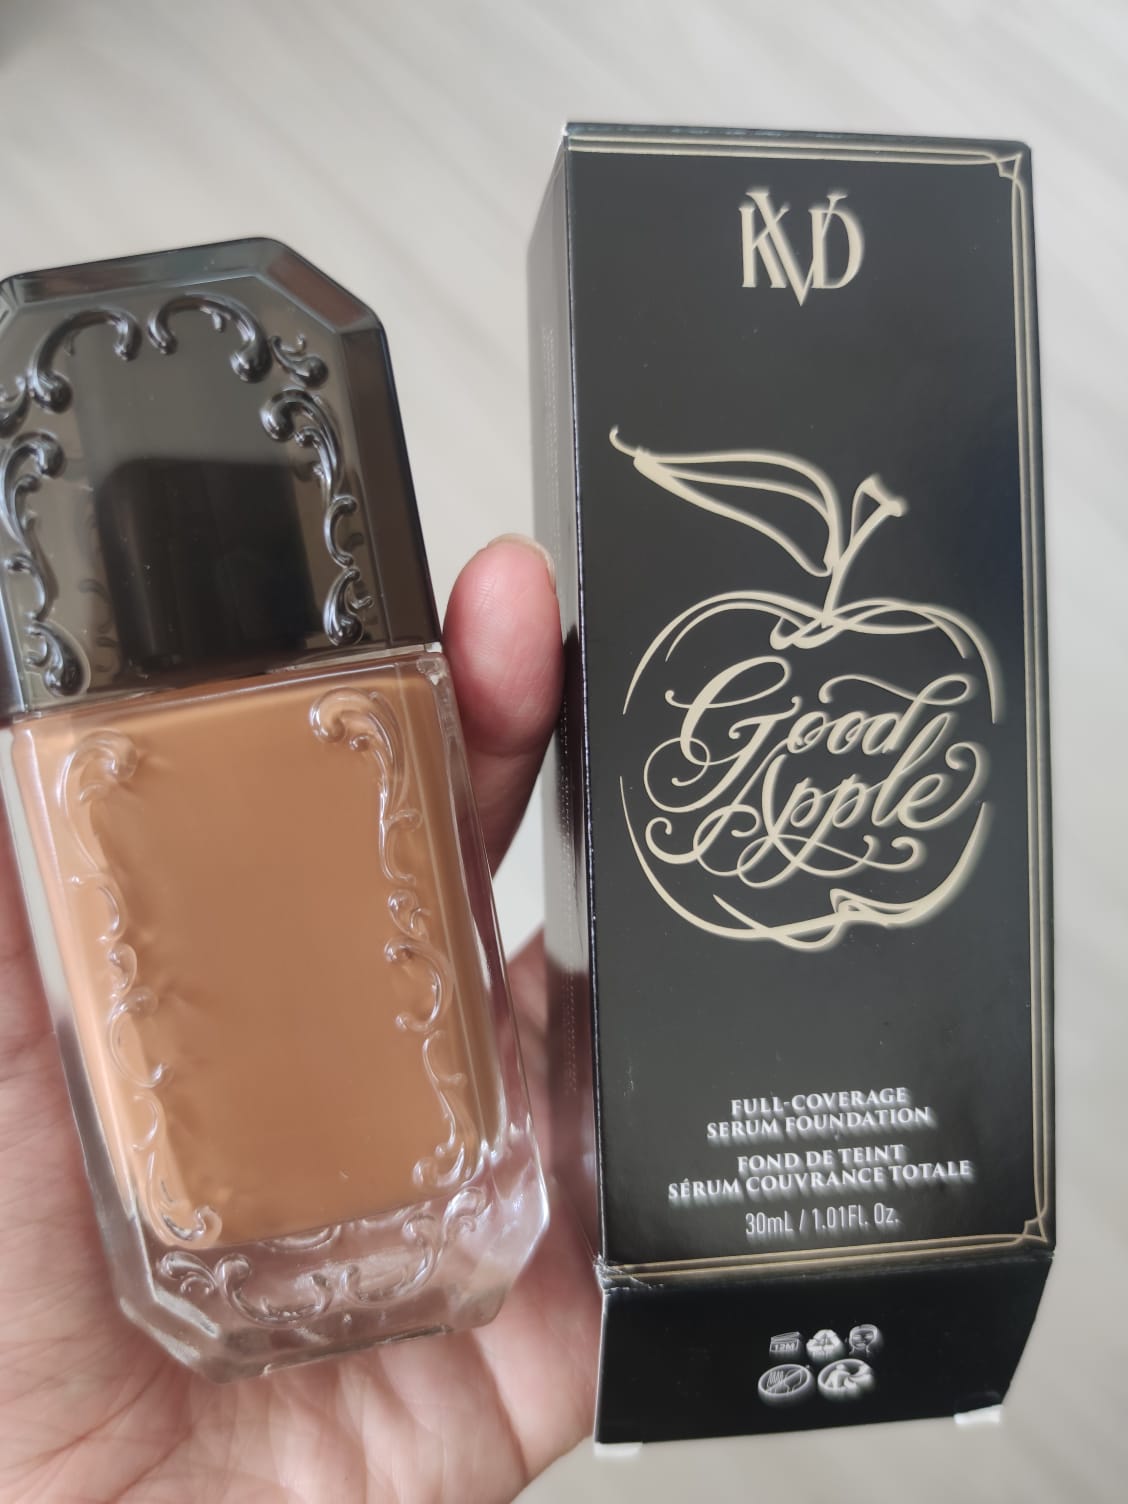 Tan 078 - for tan to deep skin with cool undertones BASE 30ml Good Apple Non-Comedogenic Full-Coverage Serum Foundation - Imagem 2